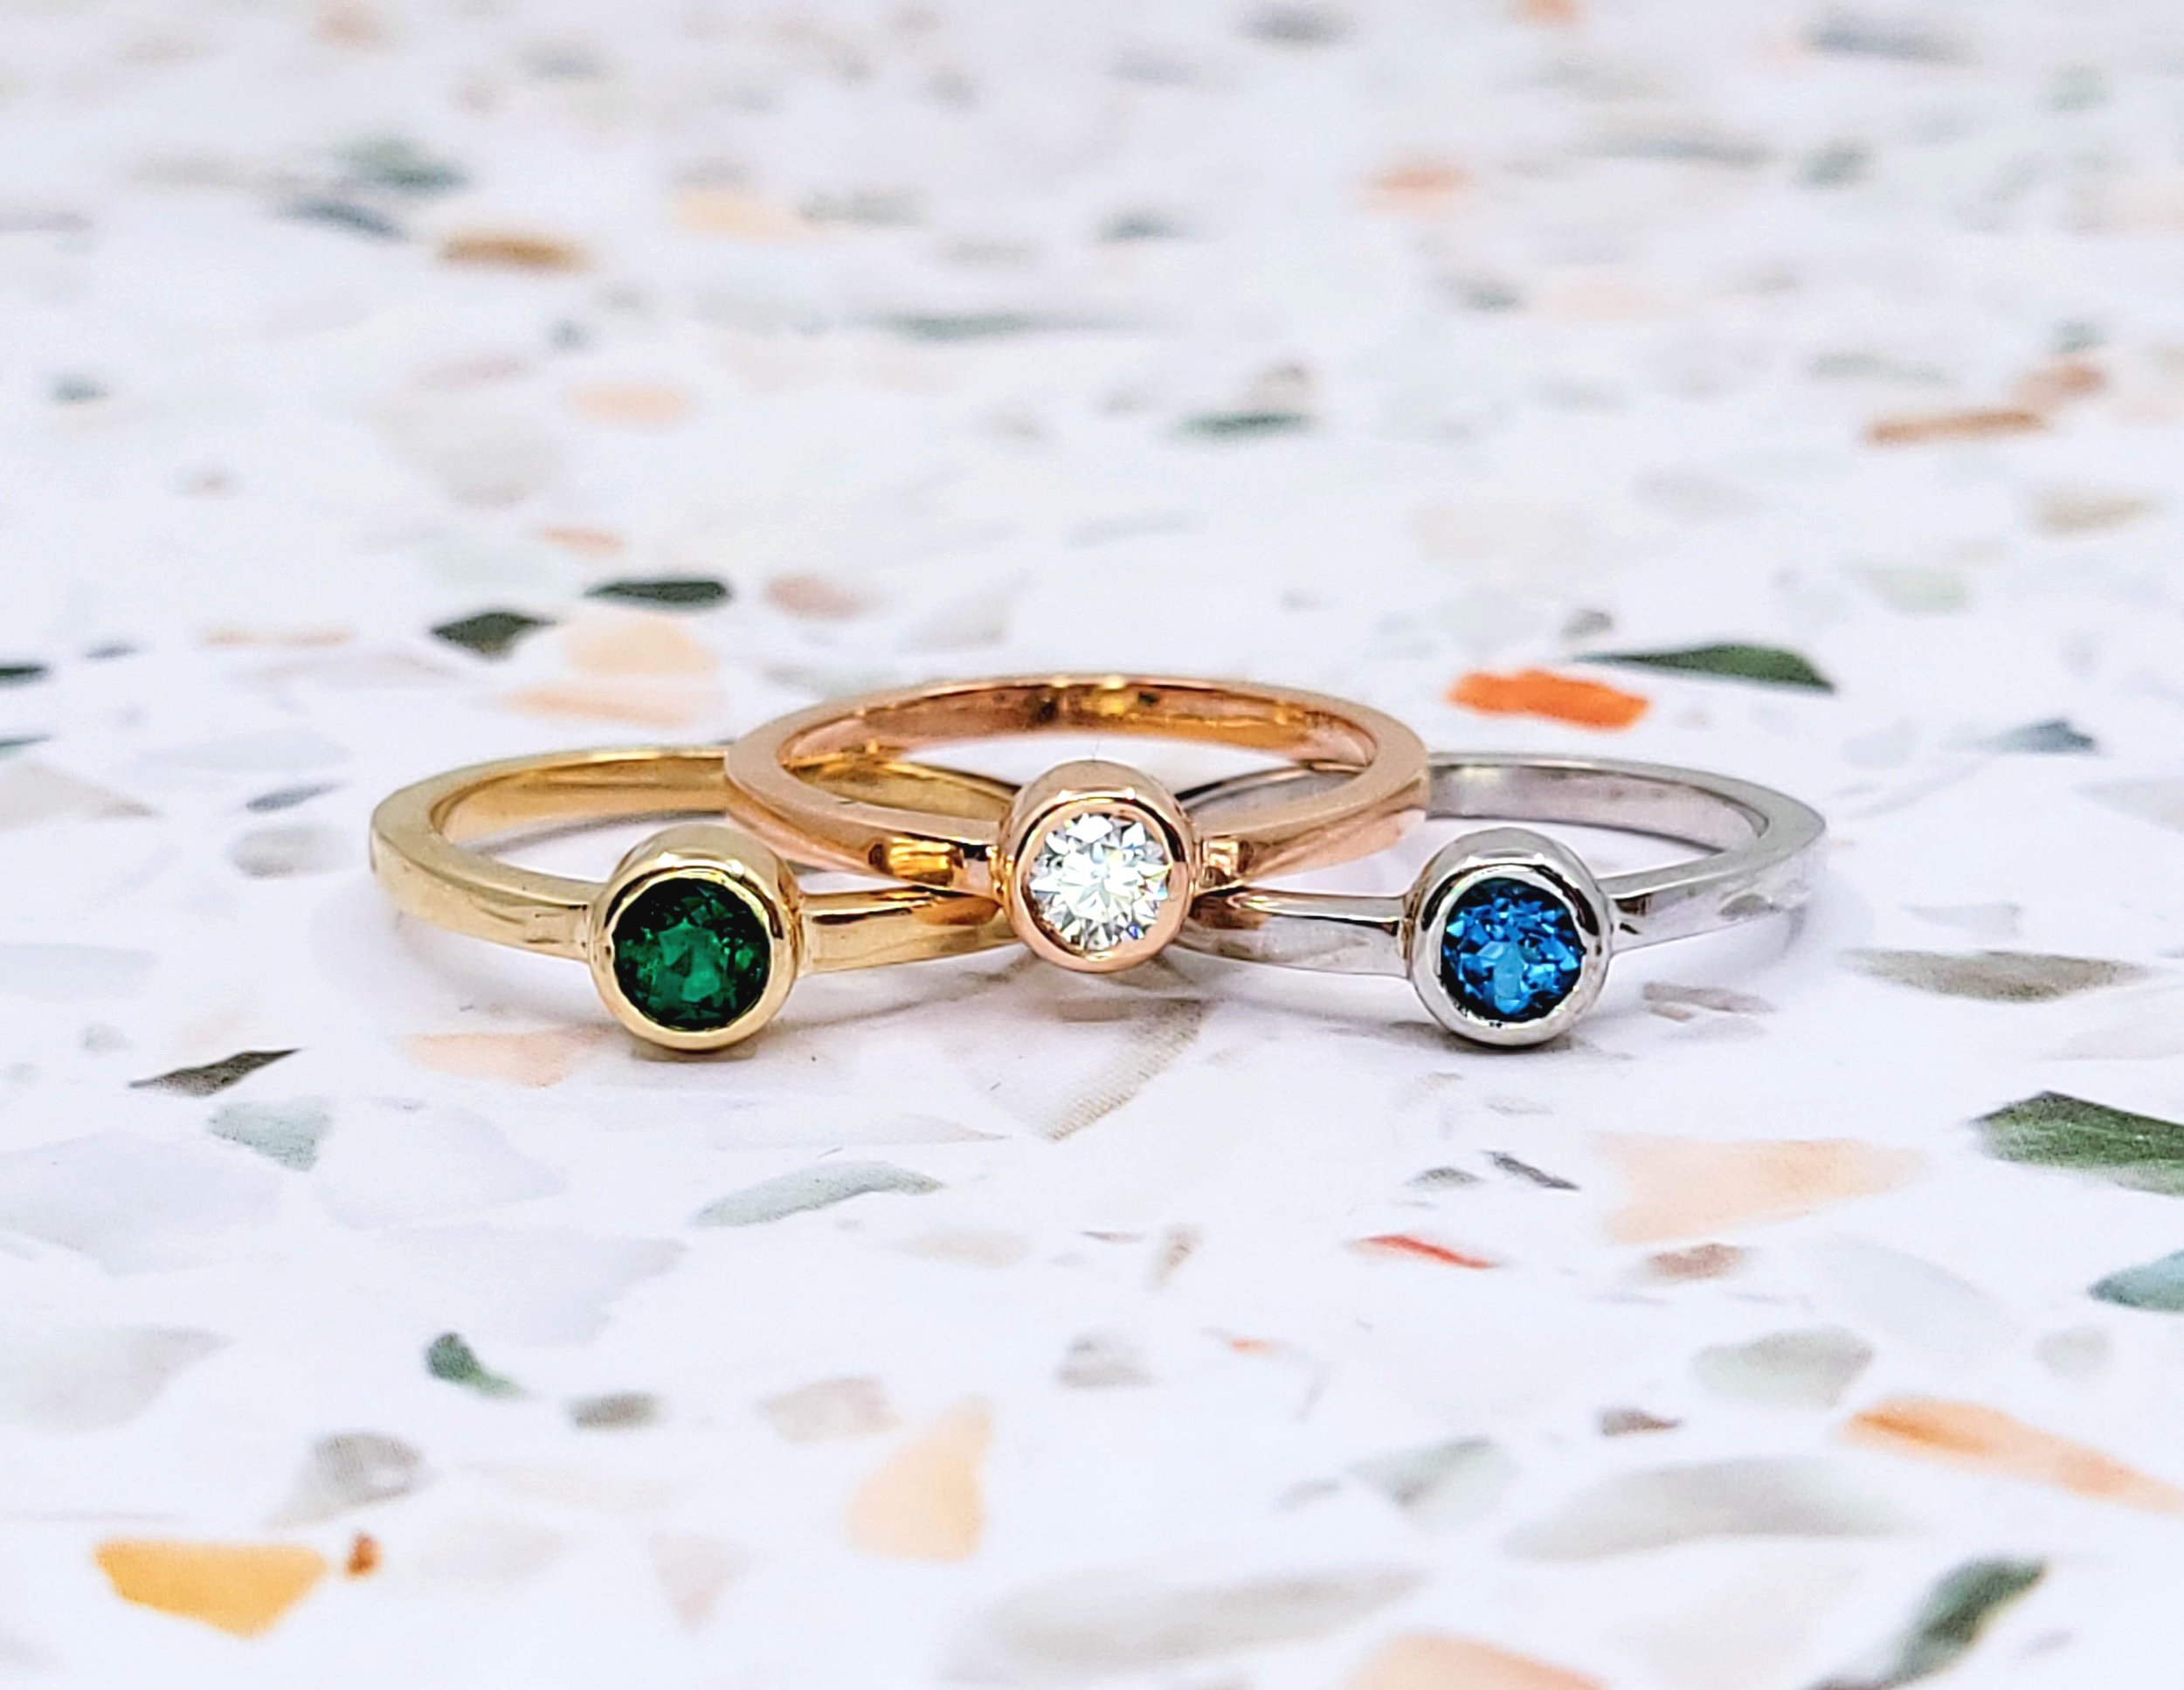 The Set of Three Pave + Enamel Stacking Rings, 14K Gold — FRY POWERS